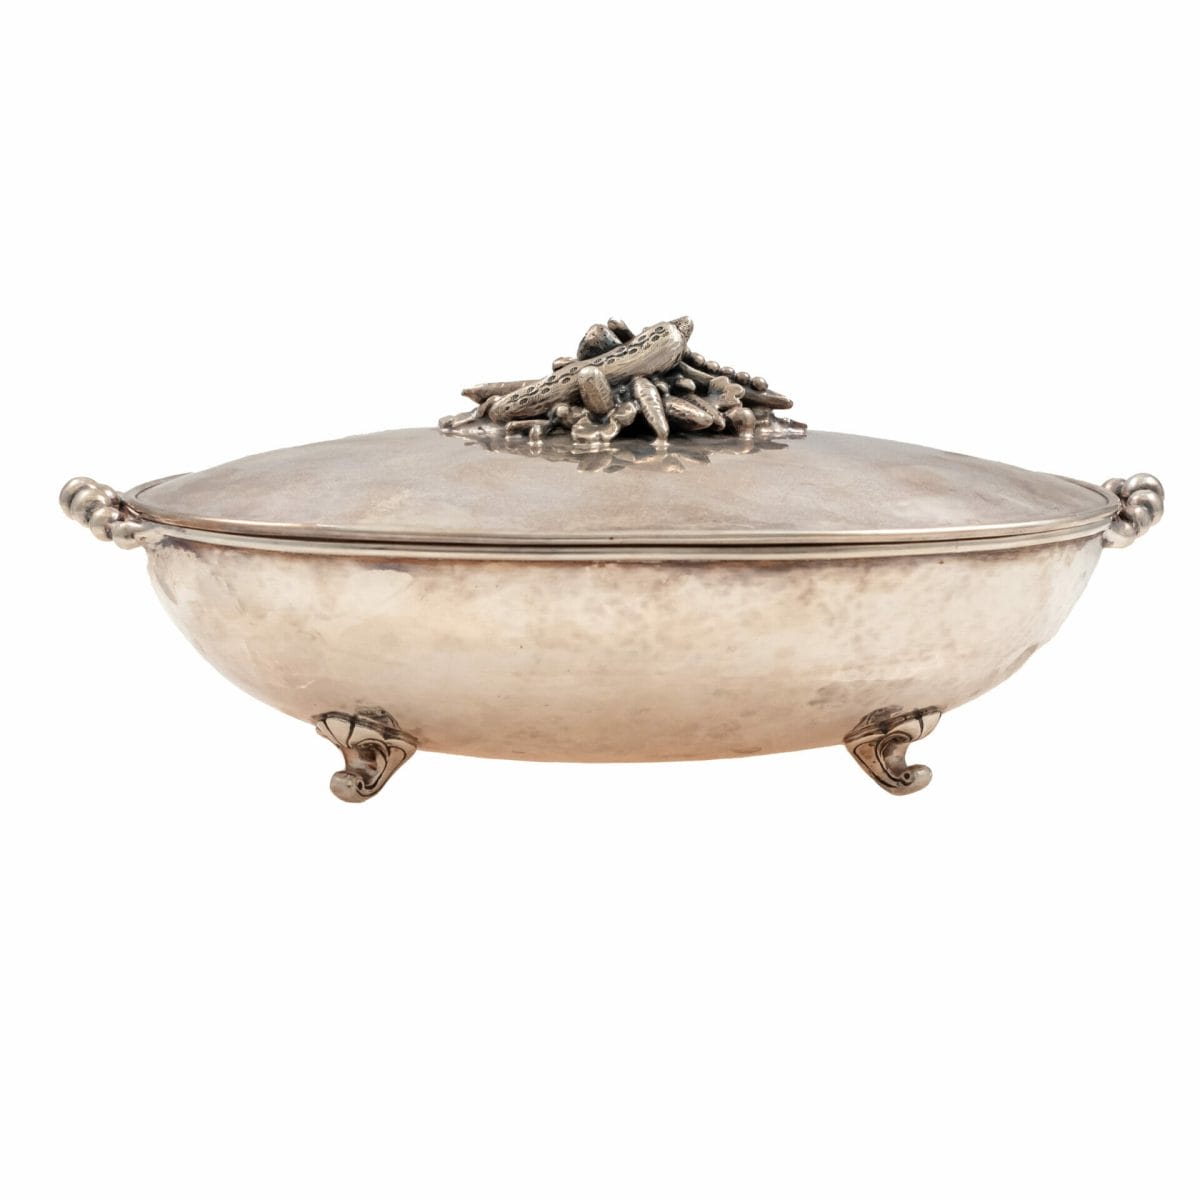 sterling covered bowl for auction in San Rafael California